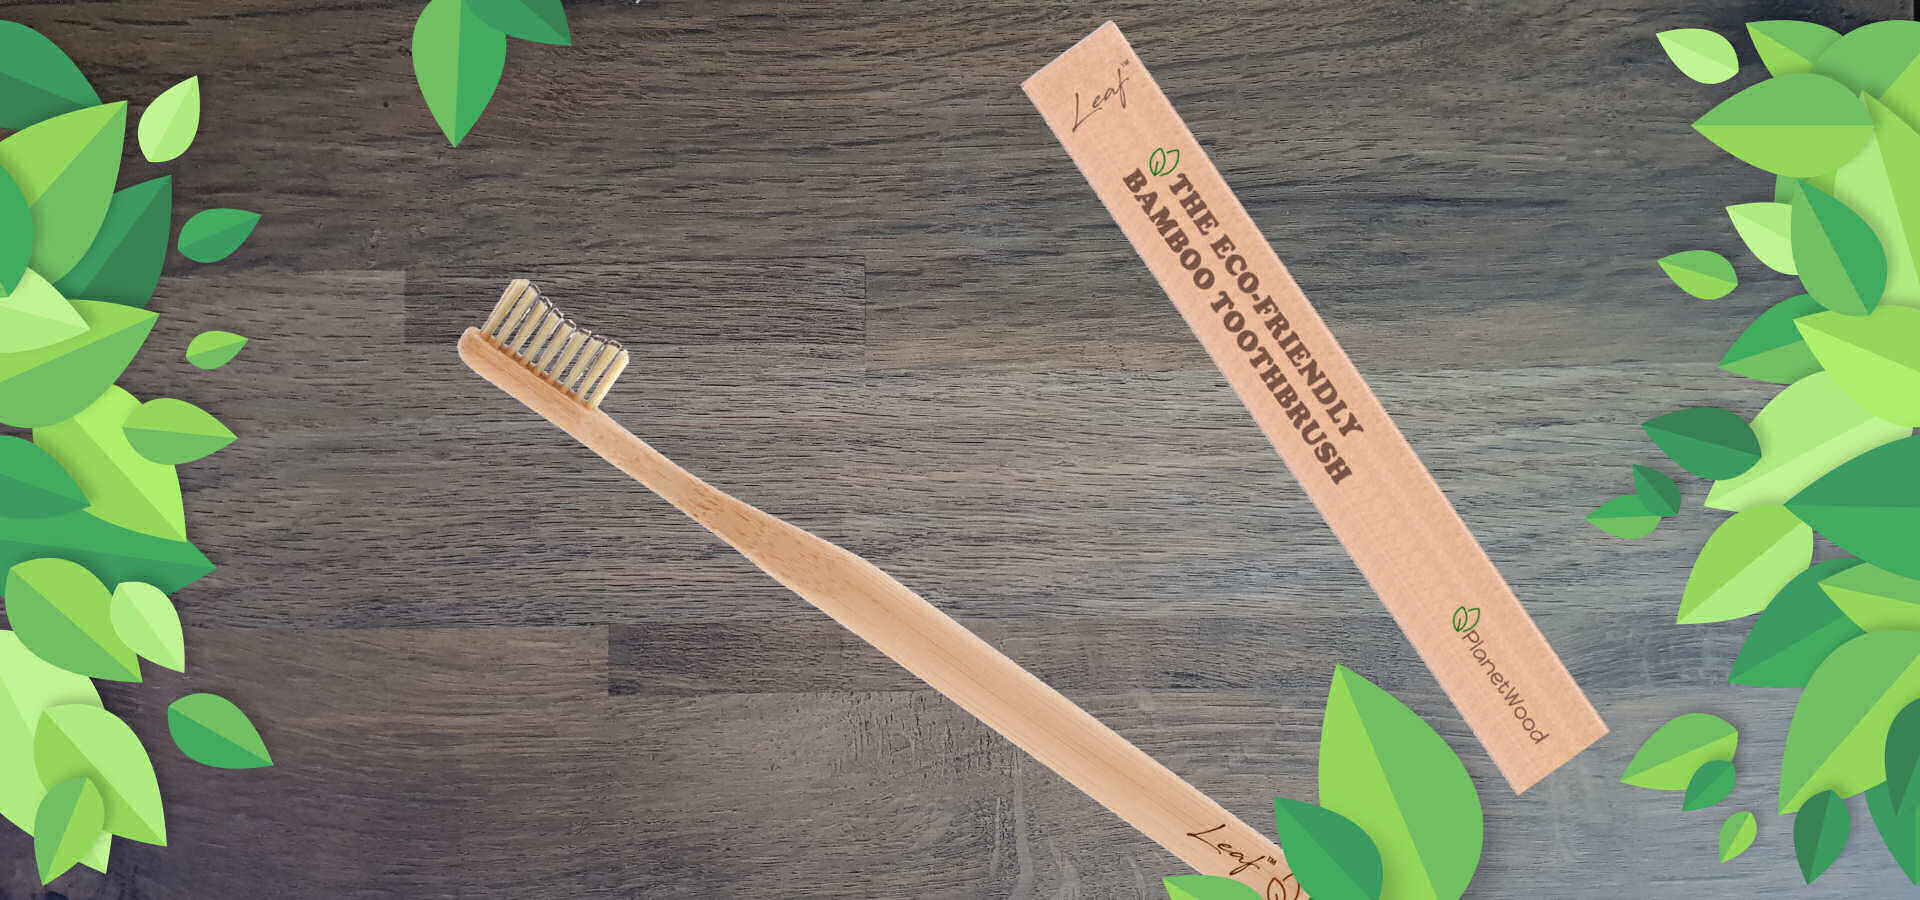 Our Bamboo toothbrush provides a cleaner future along with cleaner teeth